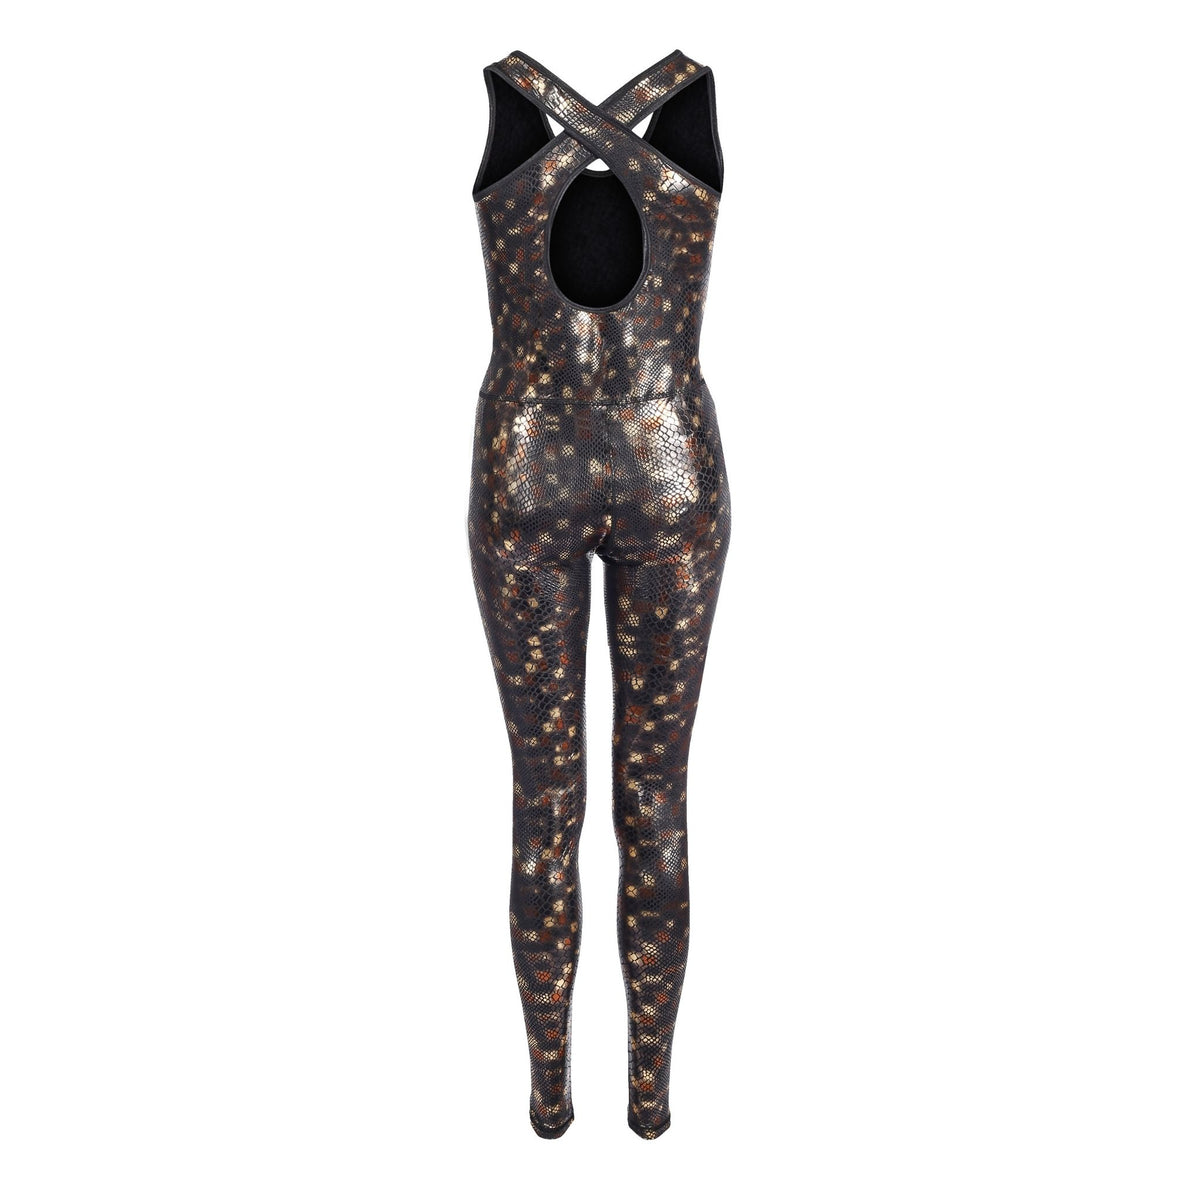 Gold Python Snake Catsuit Wet Look Spandex Reptile Jumpsuit